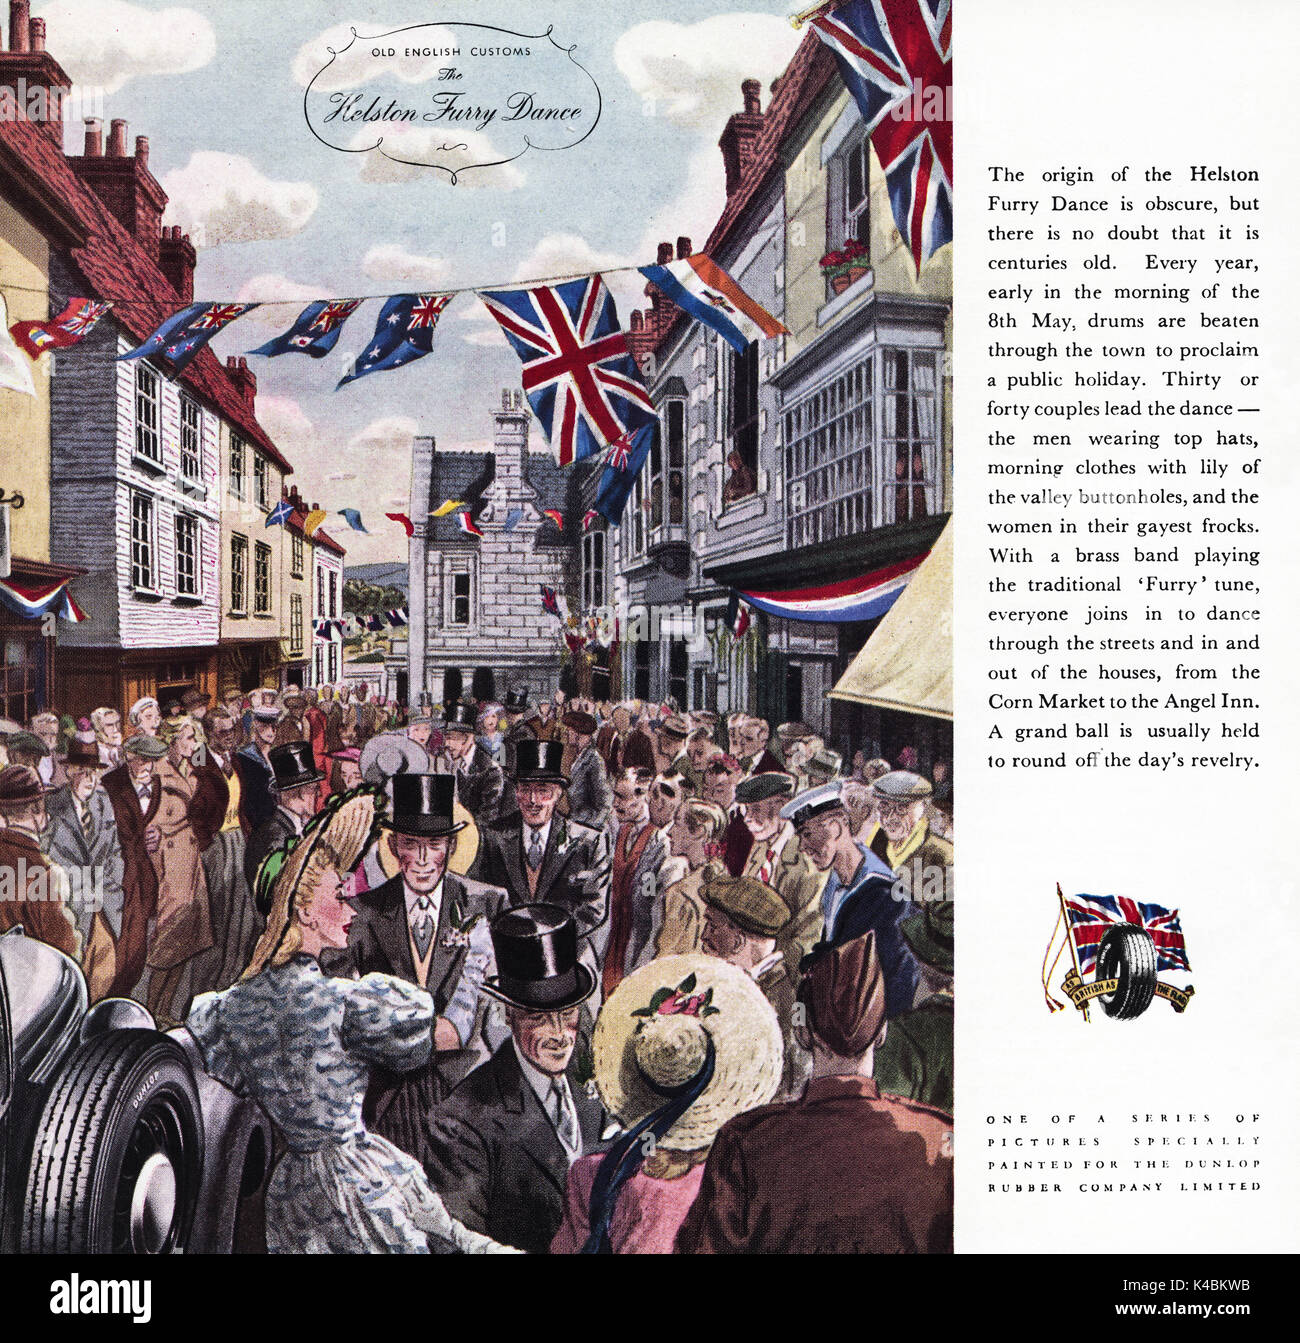 1940s old vintage original advert advertising Dunlop Rubber Company featuring Helston Furry Dance in magazine circa 1947 when supplies were still restricted under post-war rationing Stock Photo